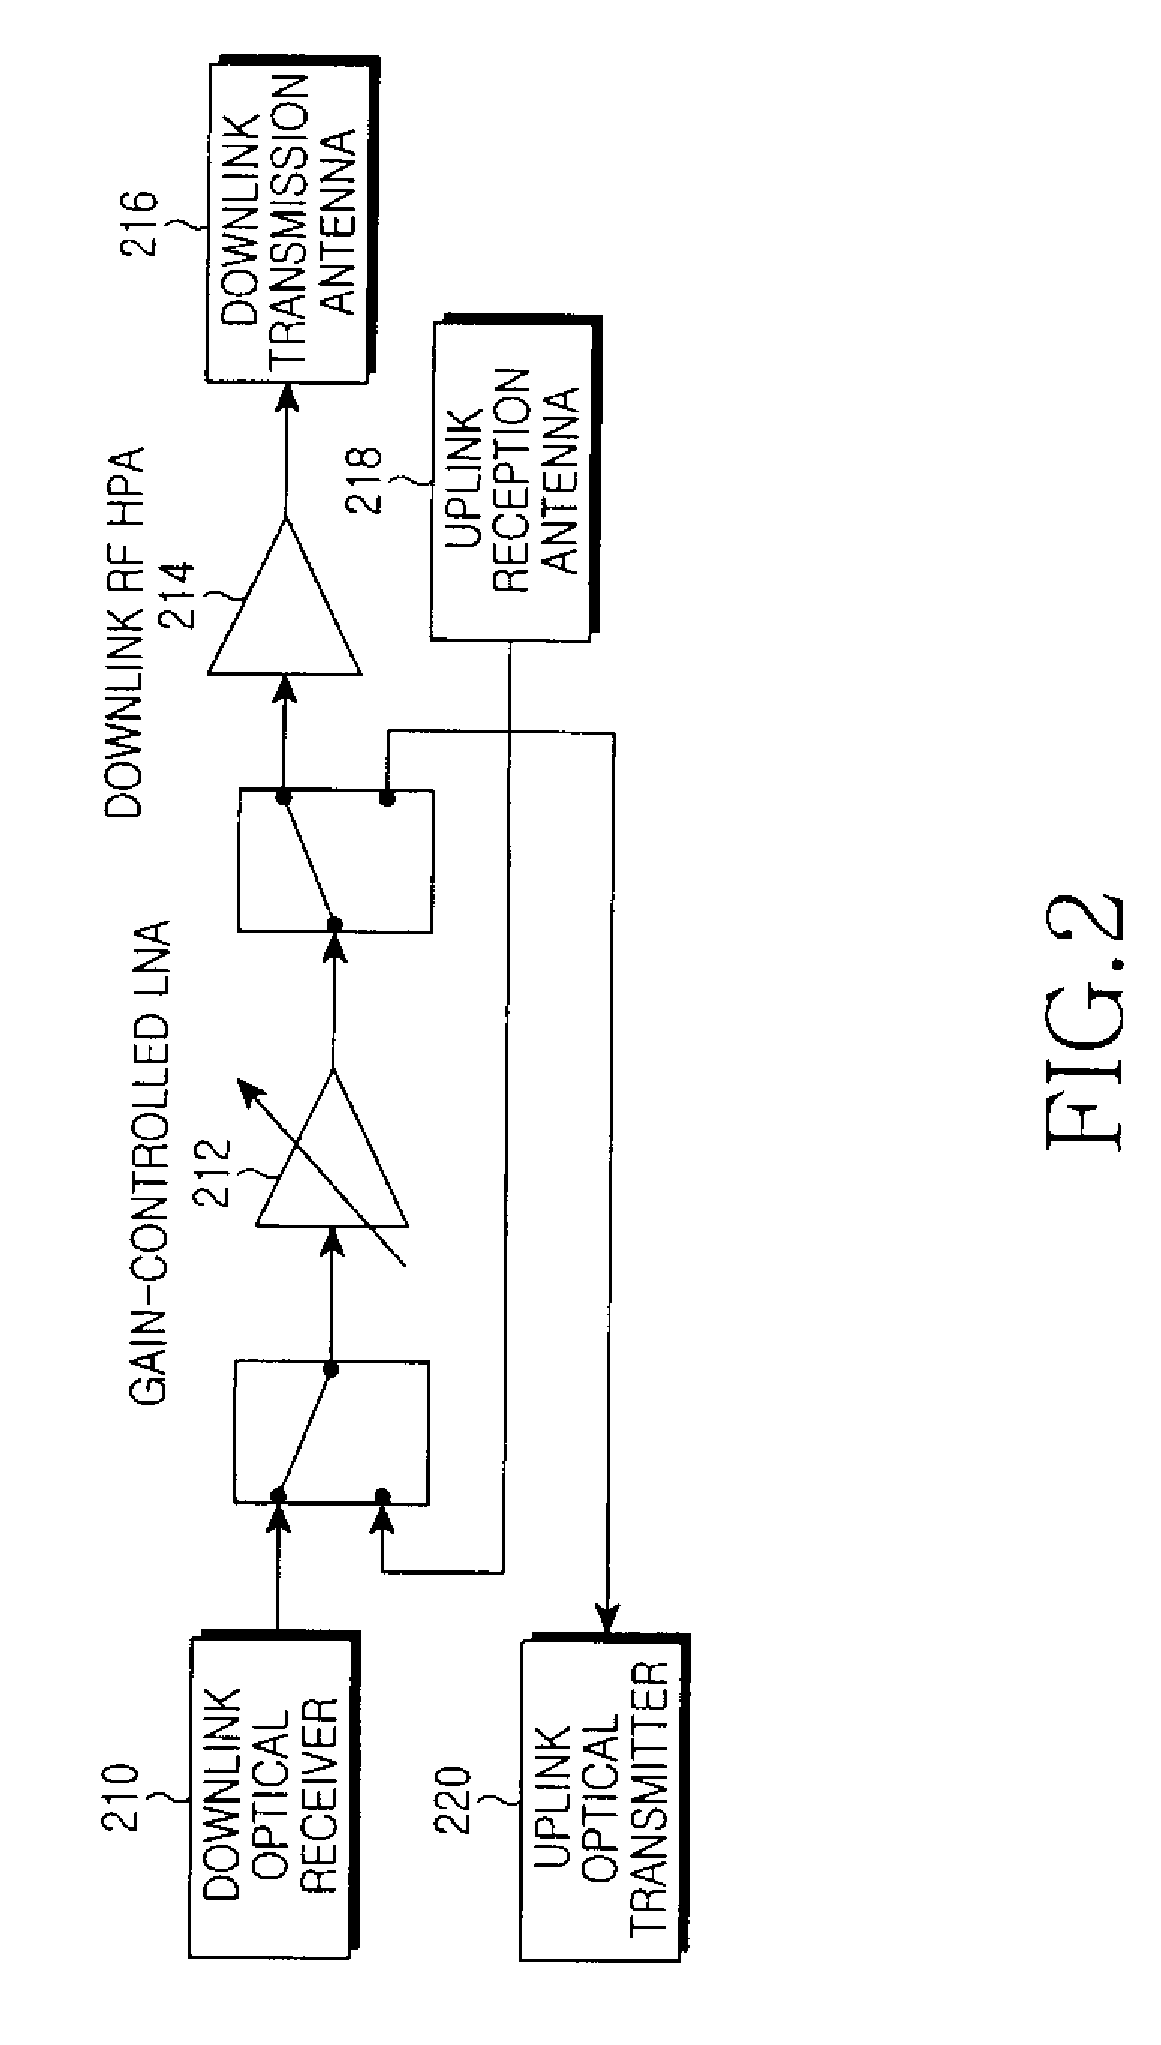 Time division duplexing remote station having low-noise amplifier shared for uplink and downlink operations and wired relay method using the same